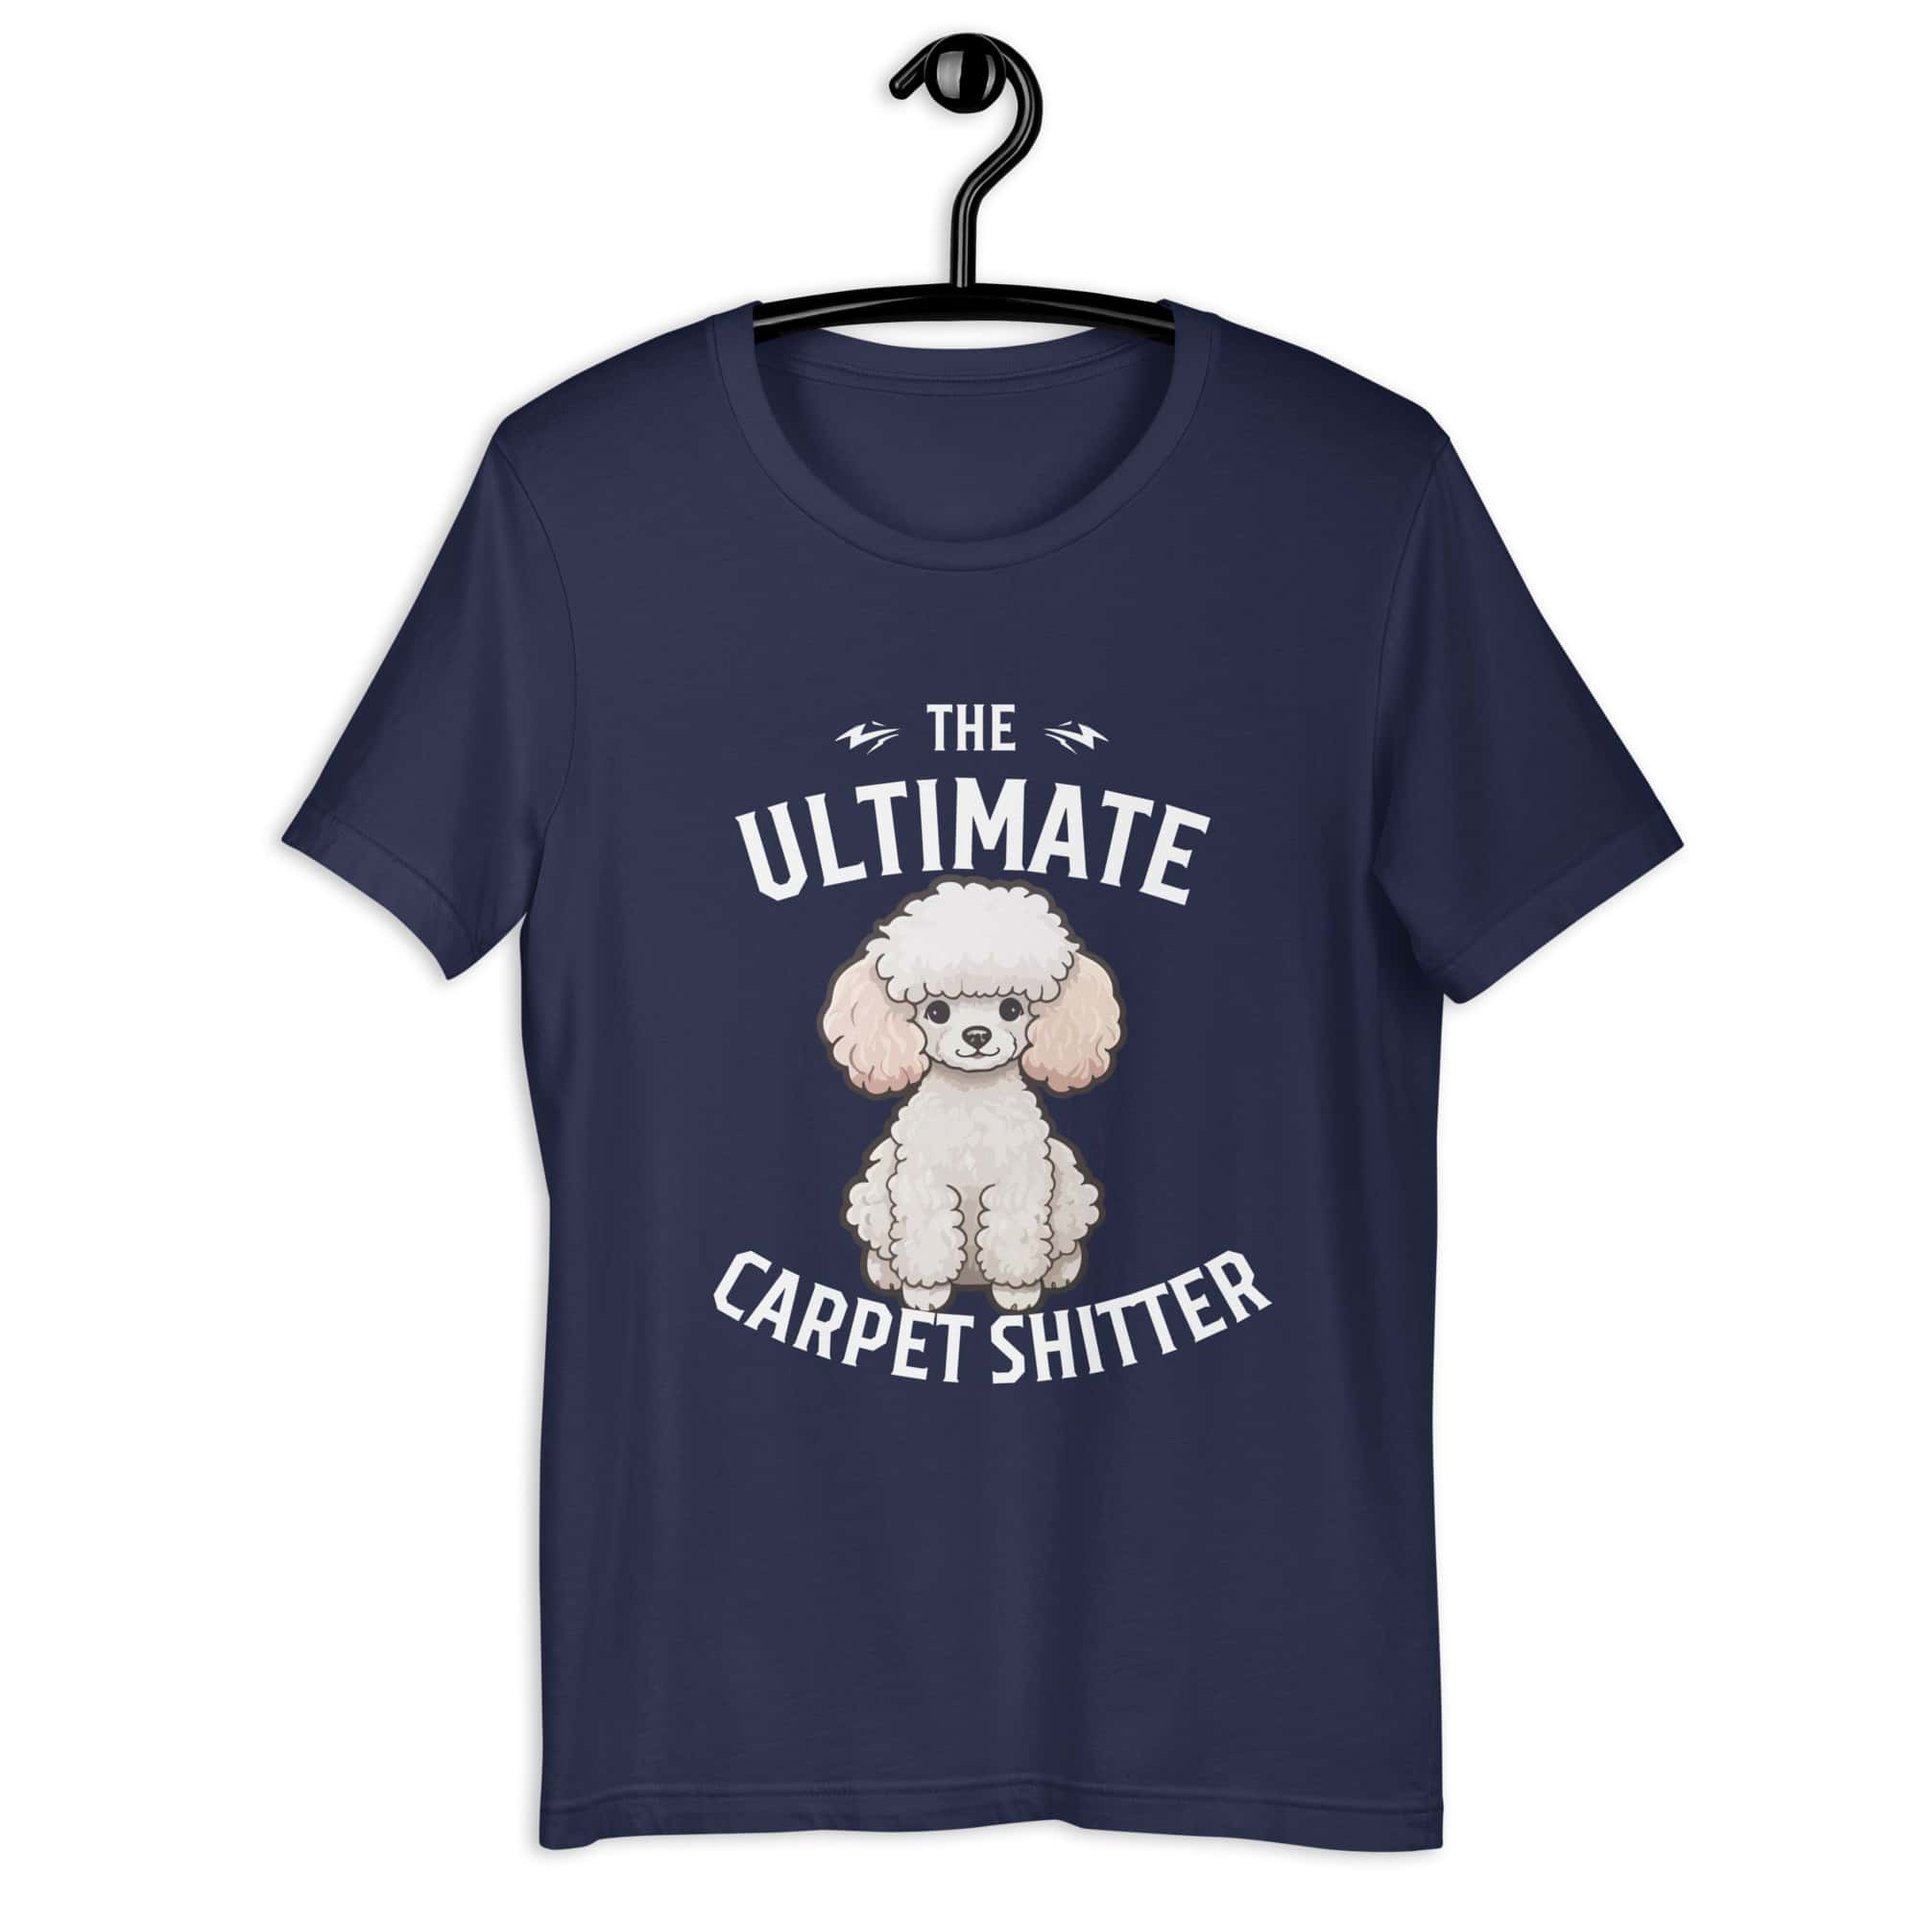 The Ultimate Carpet Shitter Funny Poodle Unisex T-Shirt navy